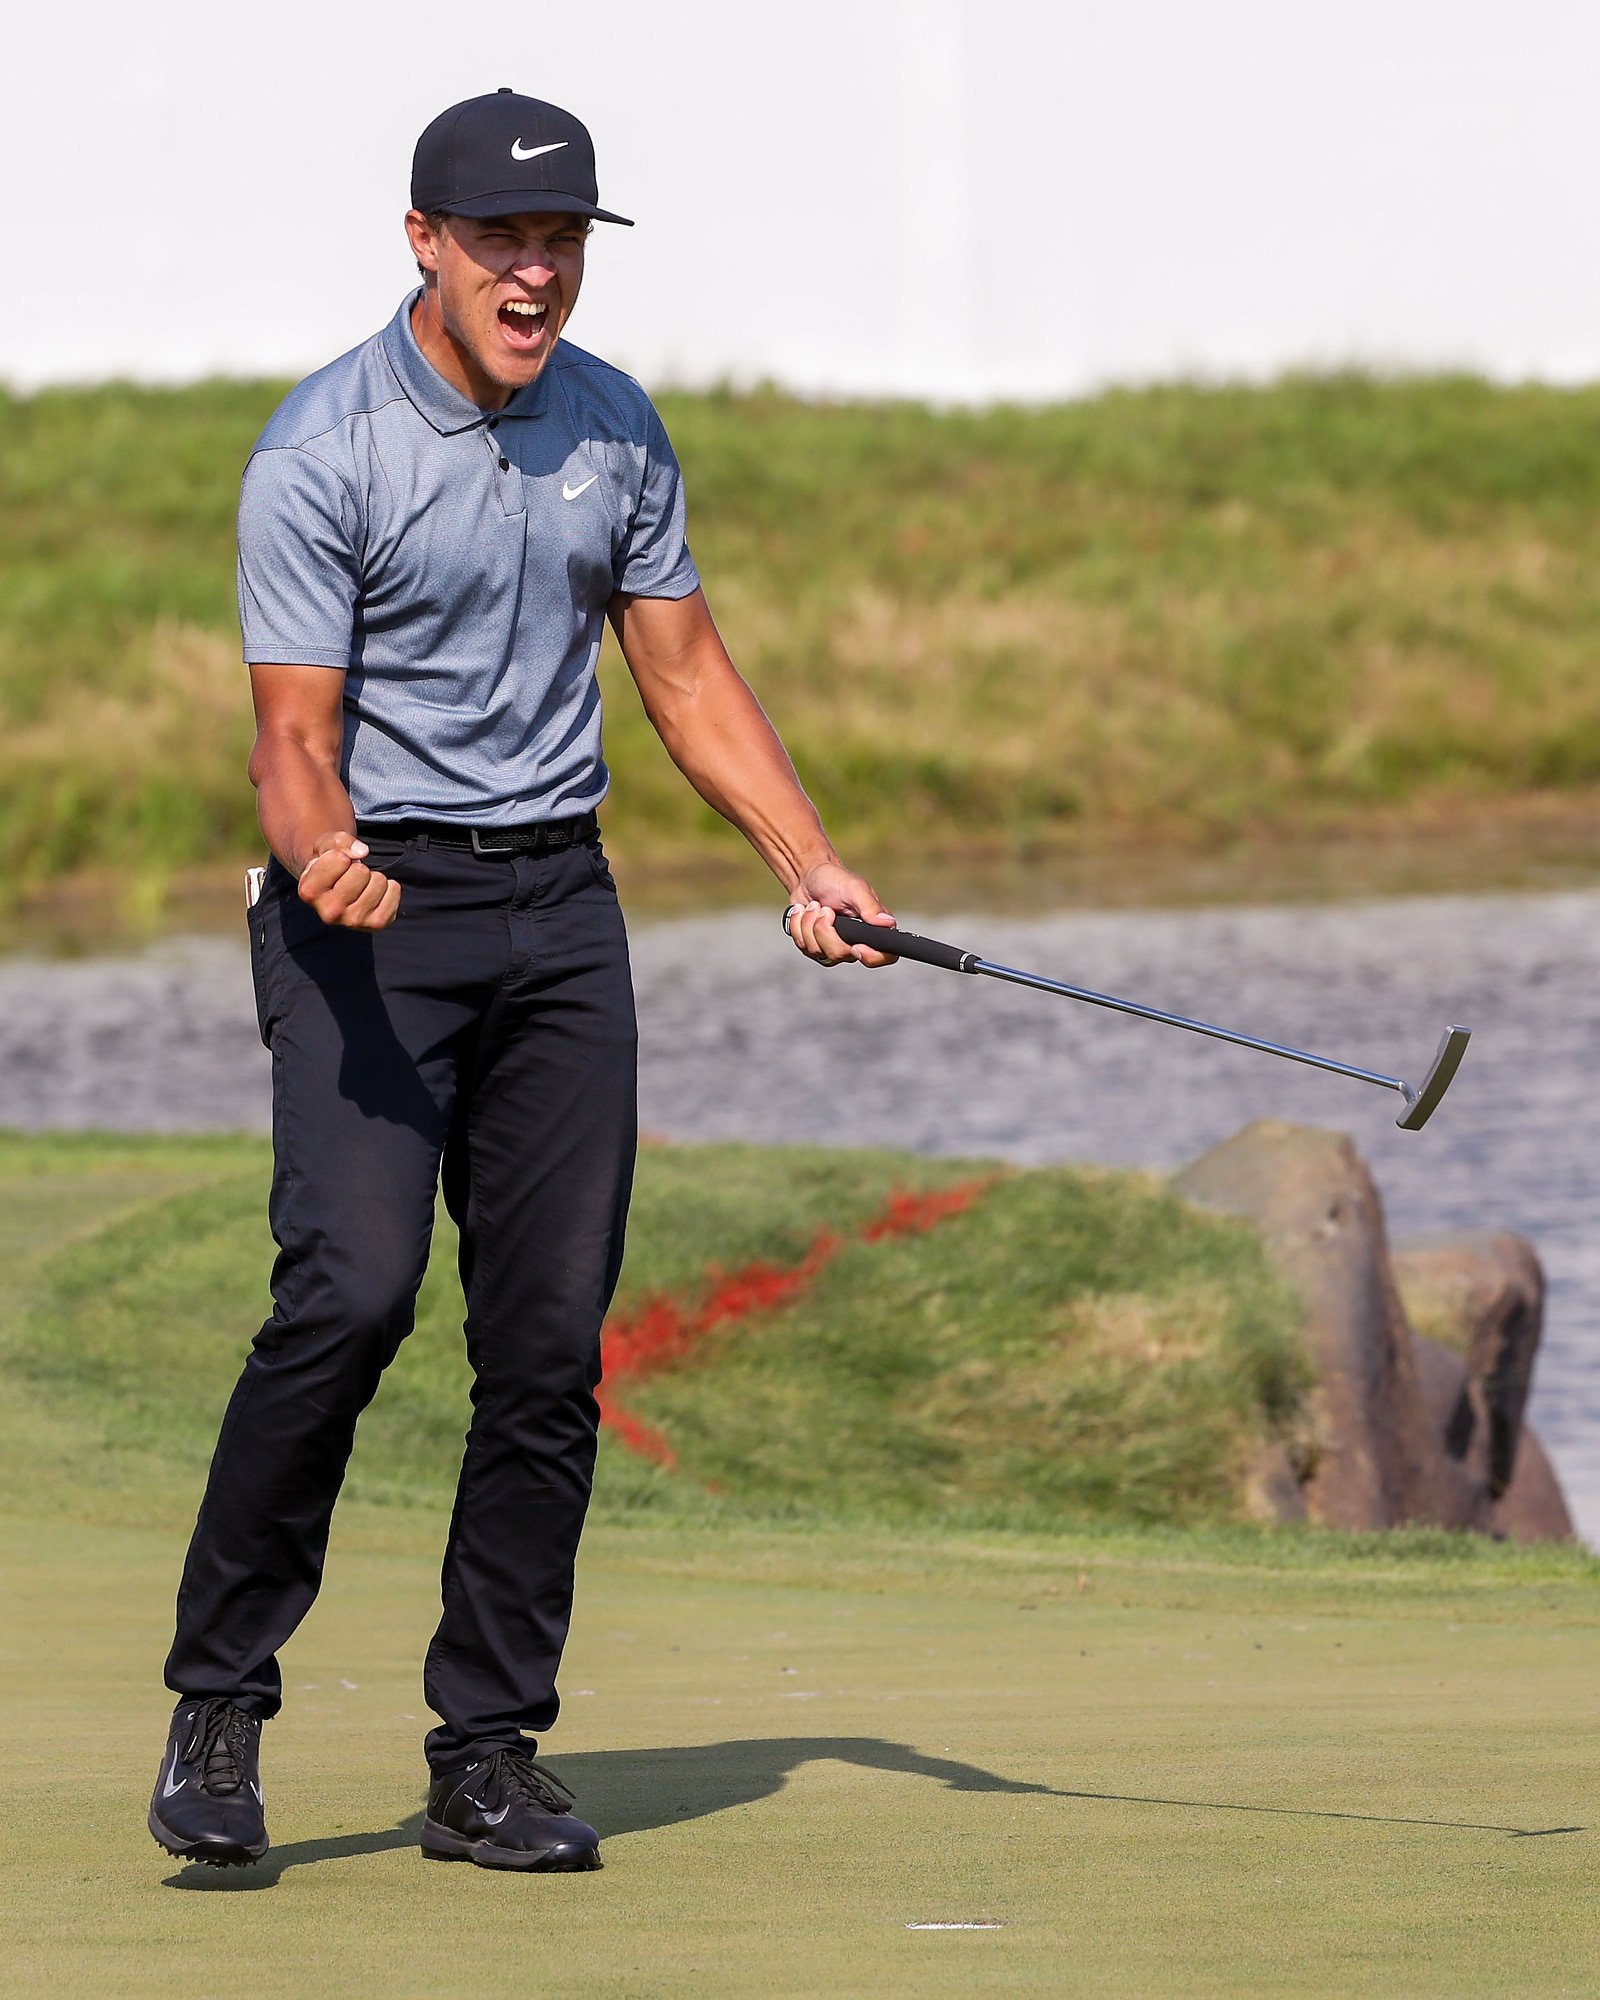  Cameron Champ celebrates after making his putt at the 18th hole to win the tournament at the 3M Open at TPC Twin Cities on Sunday, July 25, 2021 in Blaine. 